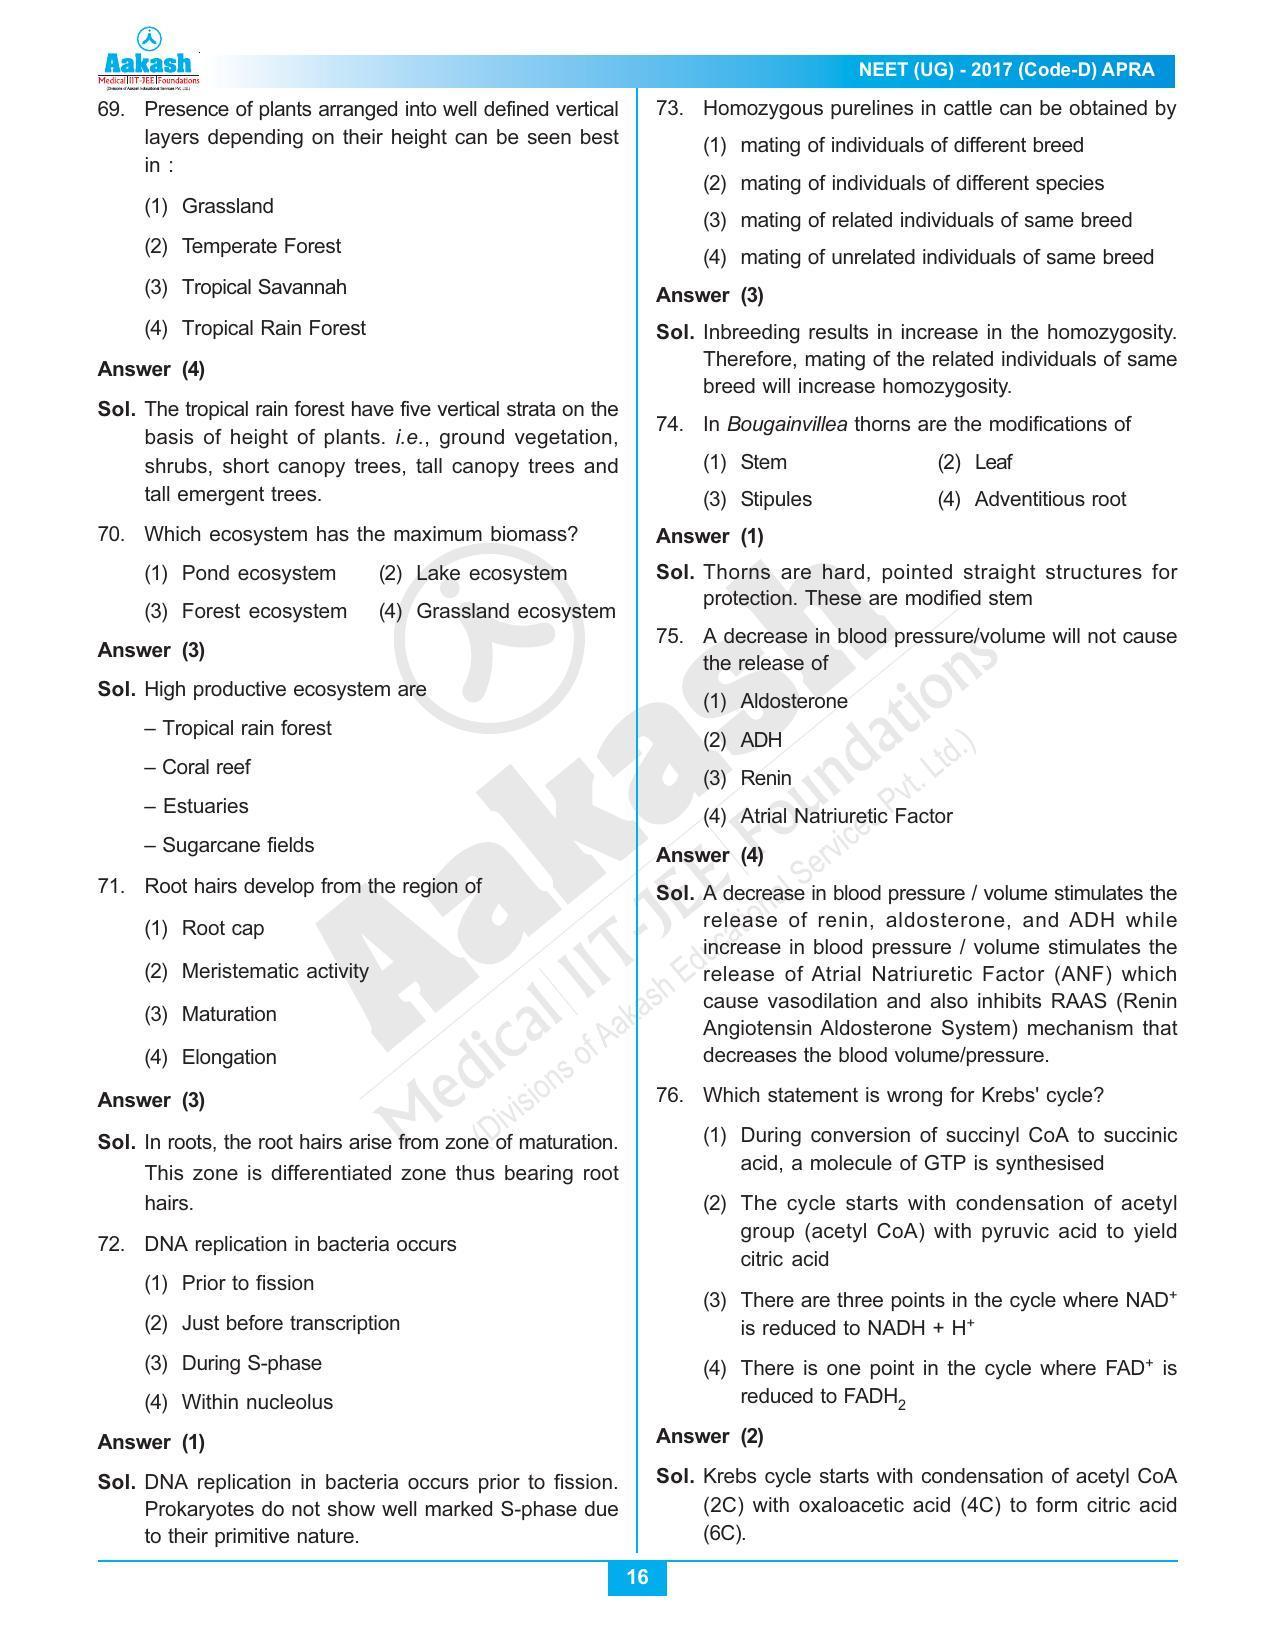  NEET Code D 2017 Answer & Solutions - Page 16